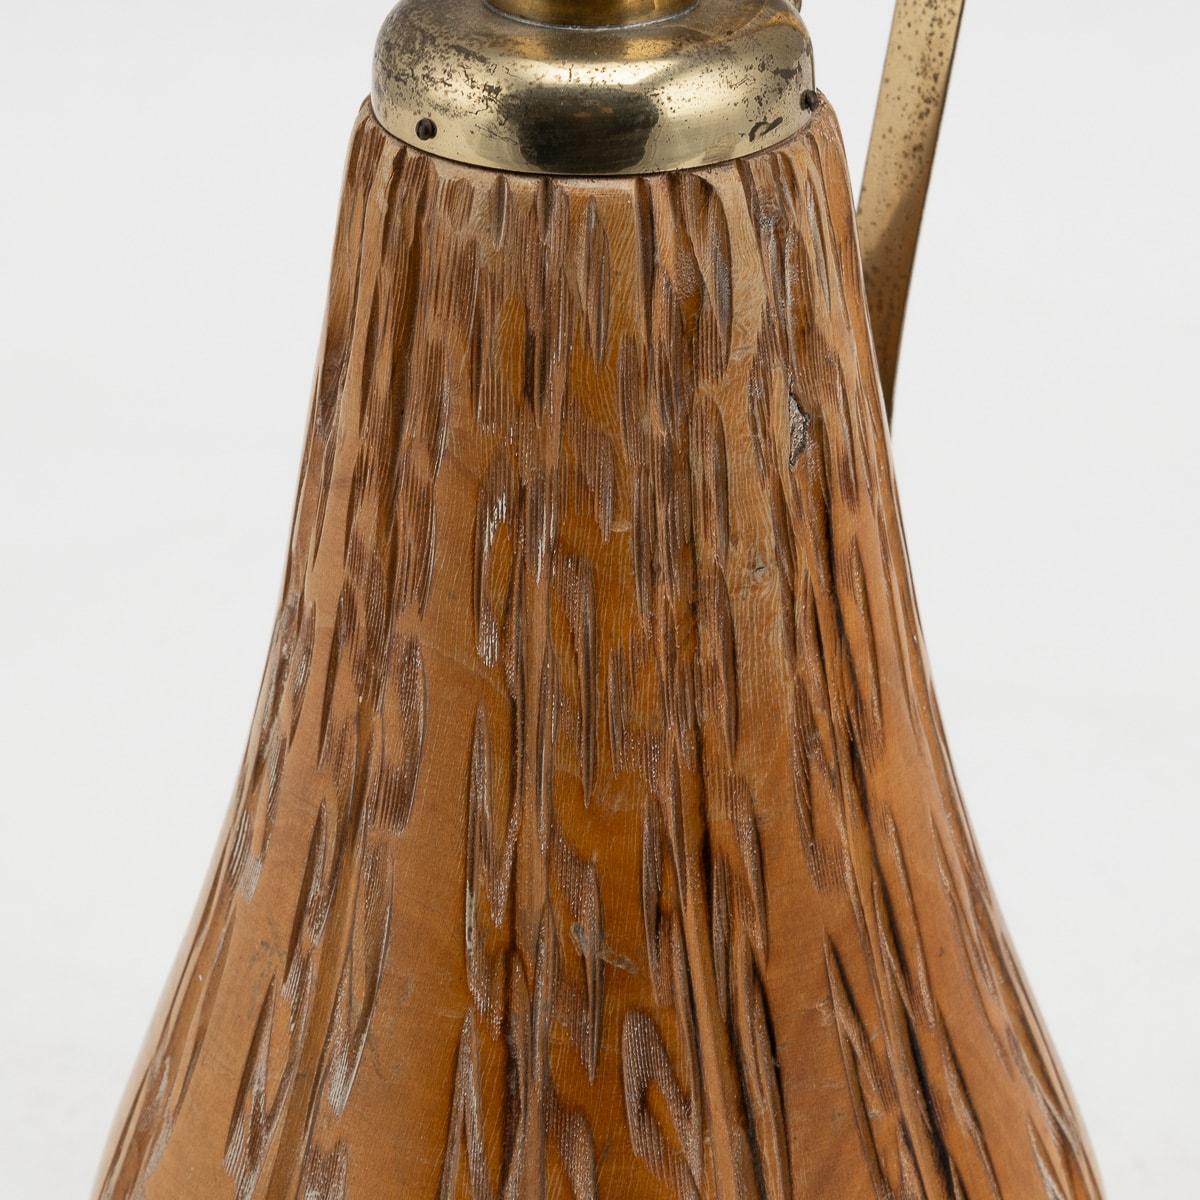 20th Century Italian Carved Wood Flask By Aldo Tura For Macabo c.1960 For Sale 2